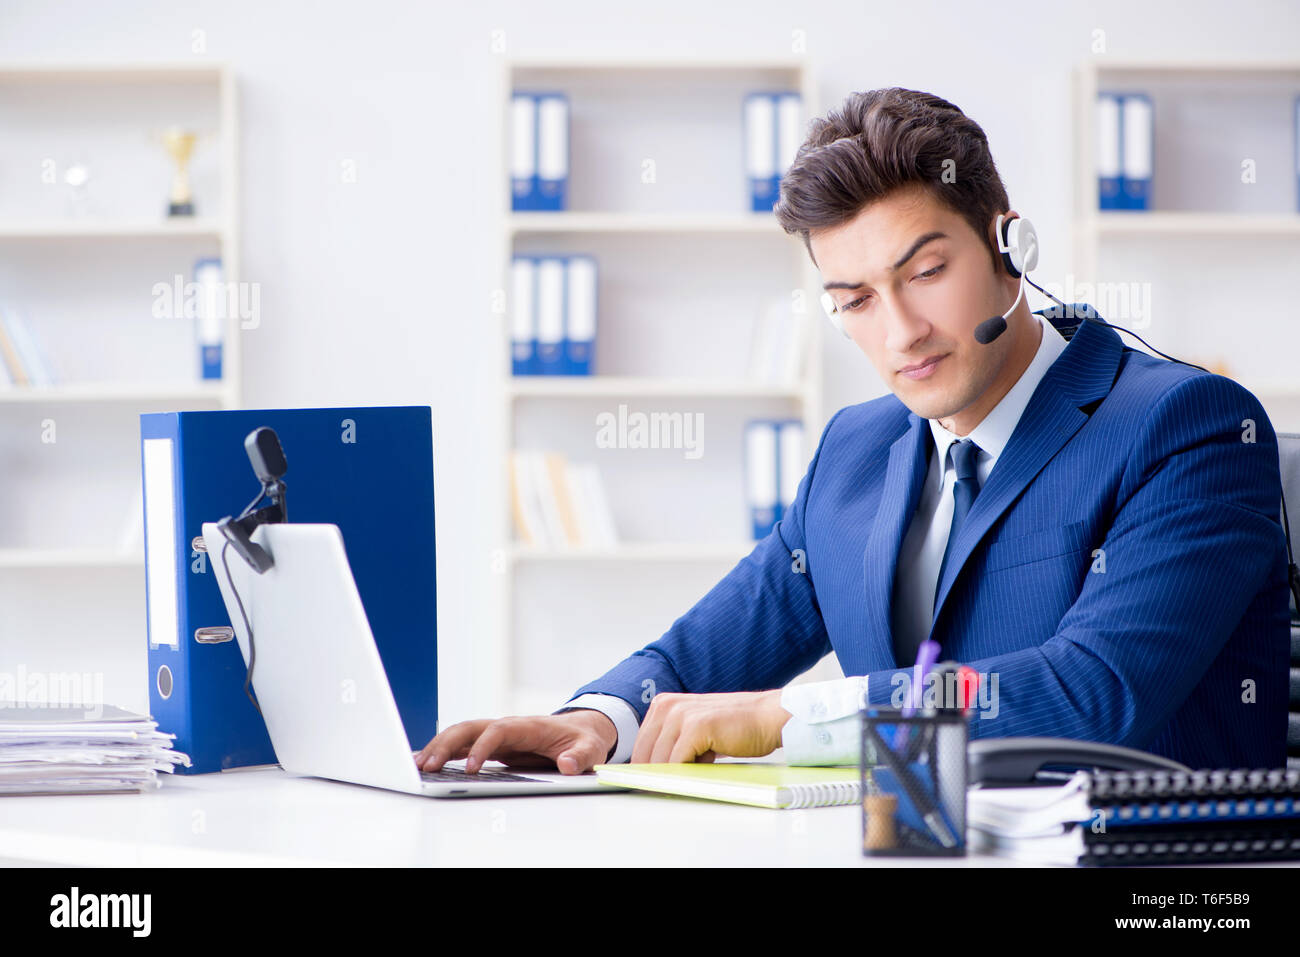 Young Help Desk Operator Working In Office Stock Photo 244966605